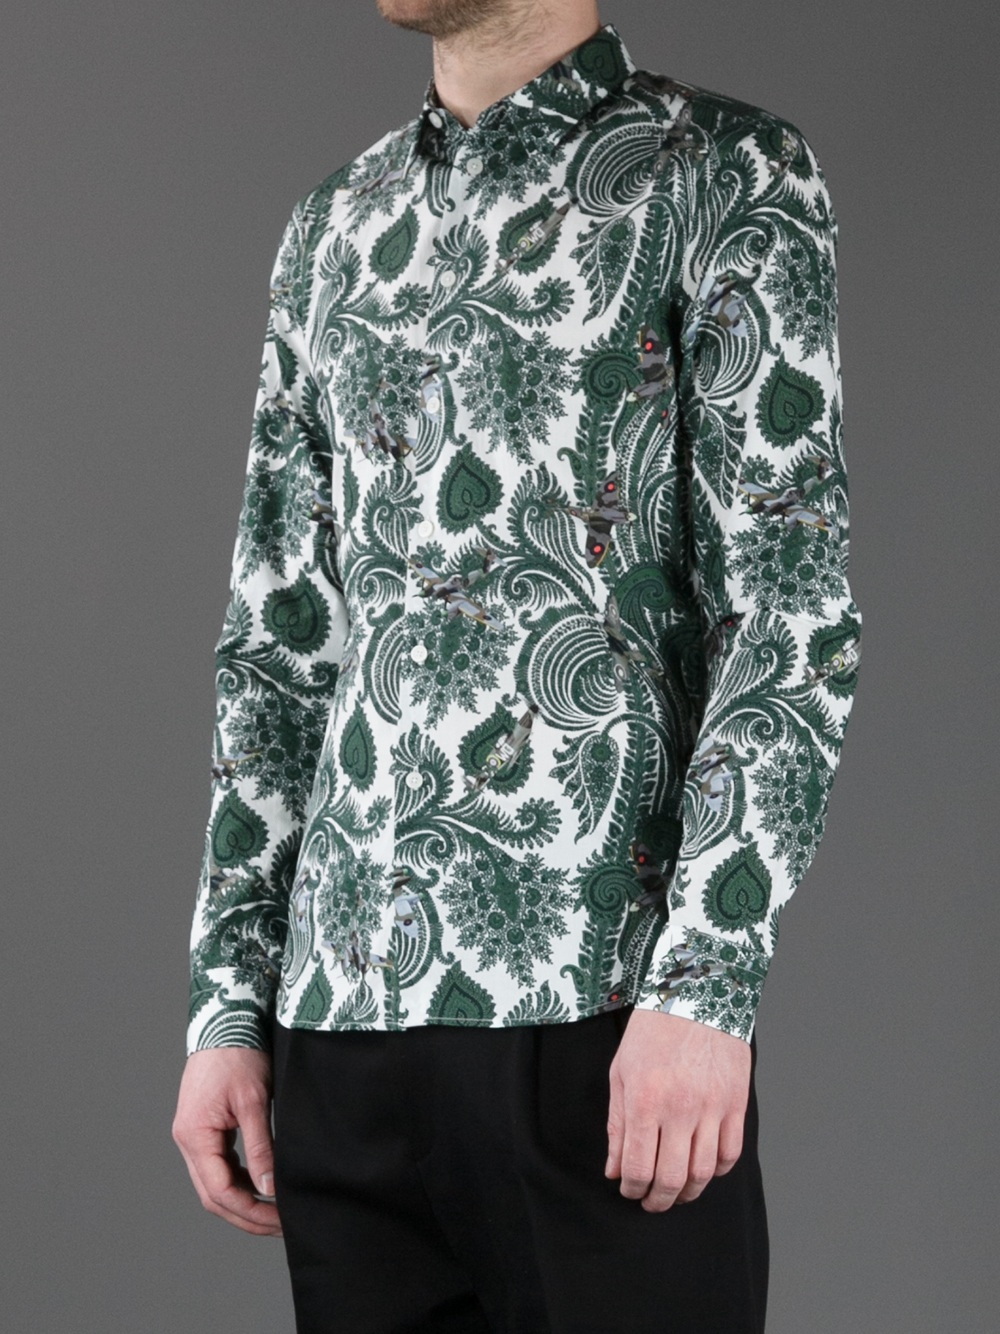 Givenchy Paisley Print Shirt in Green for Men - Lyst